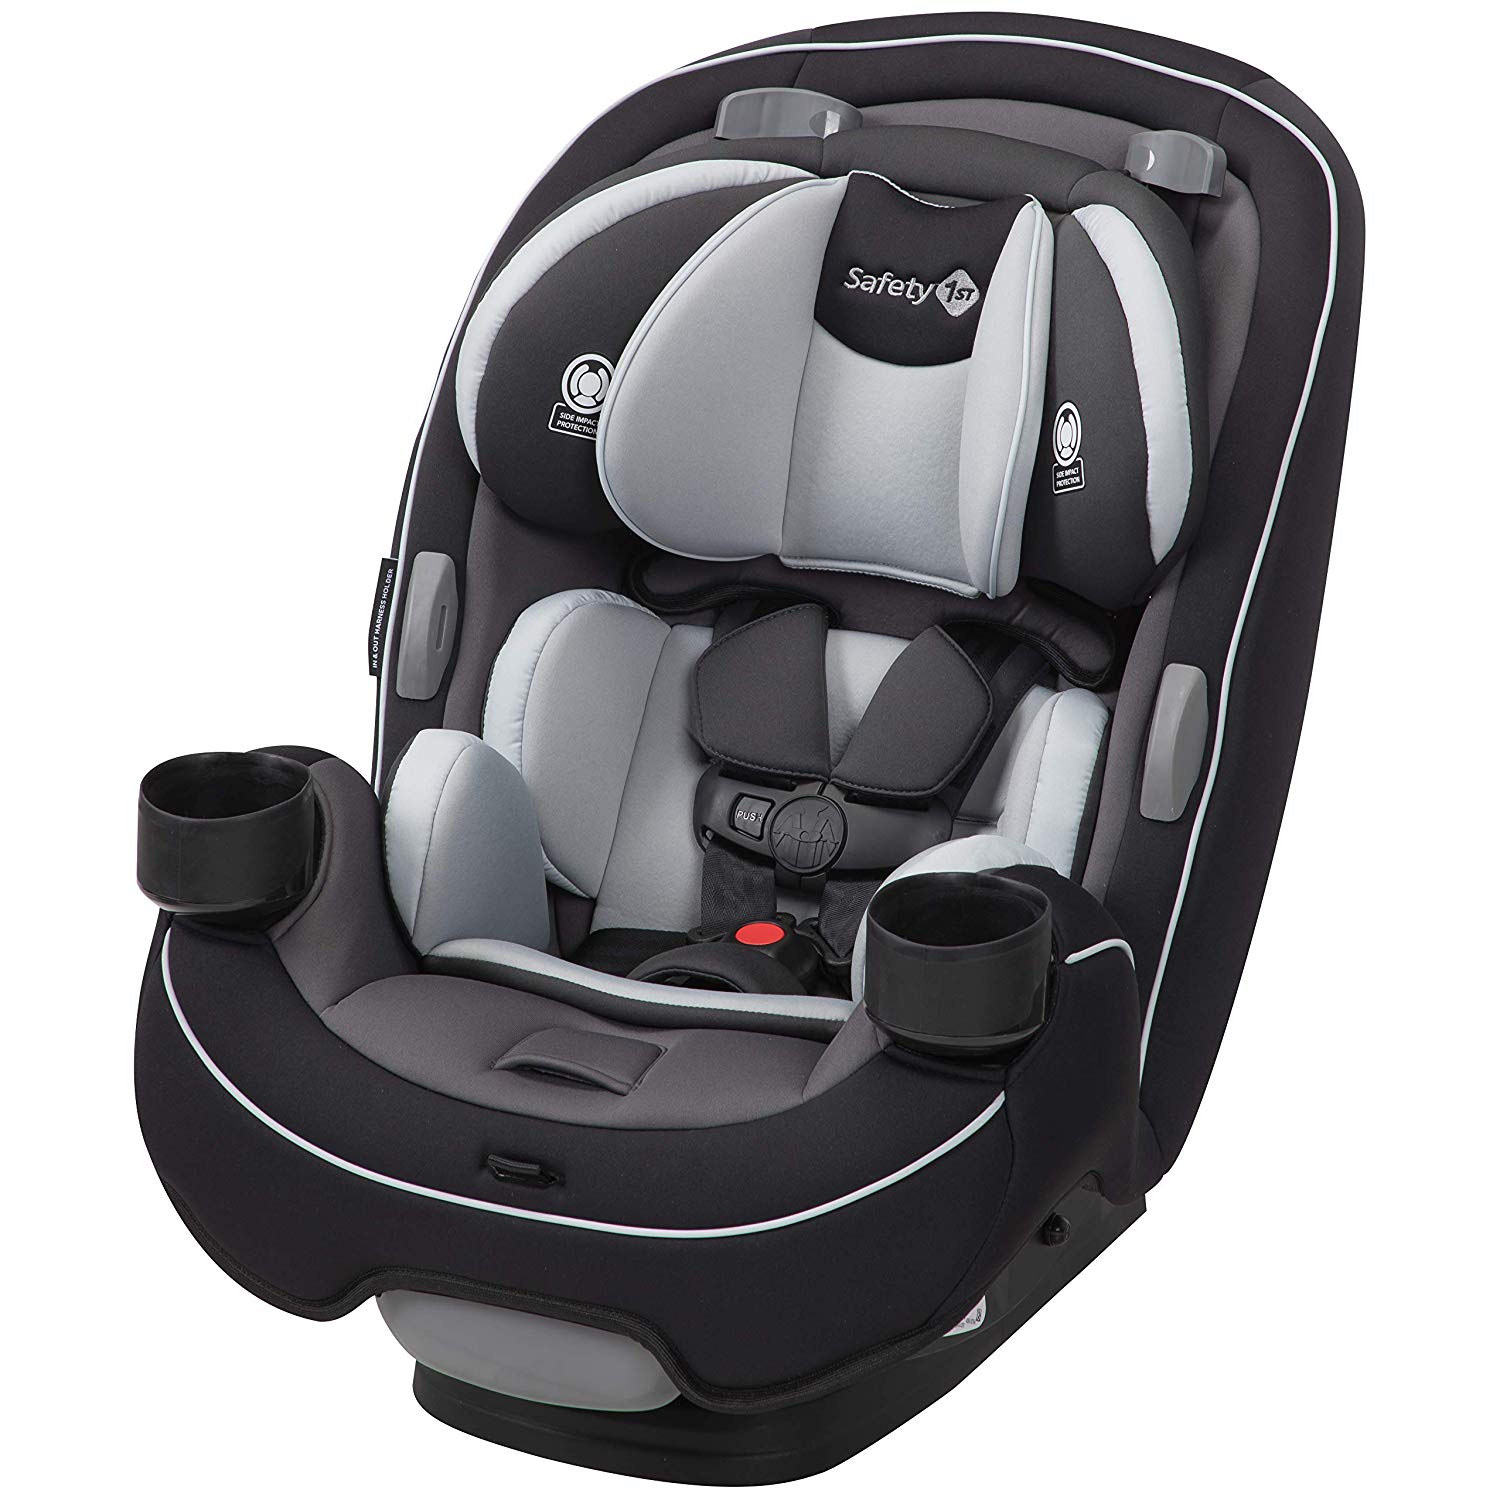 Safety 1st Grow Side Impact Protection Convertible Car Seat